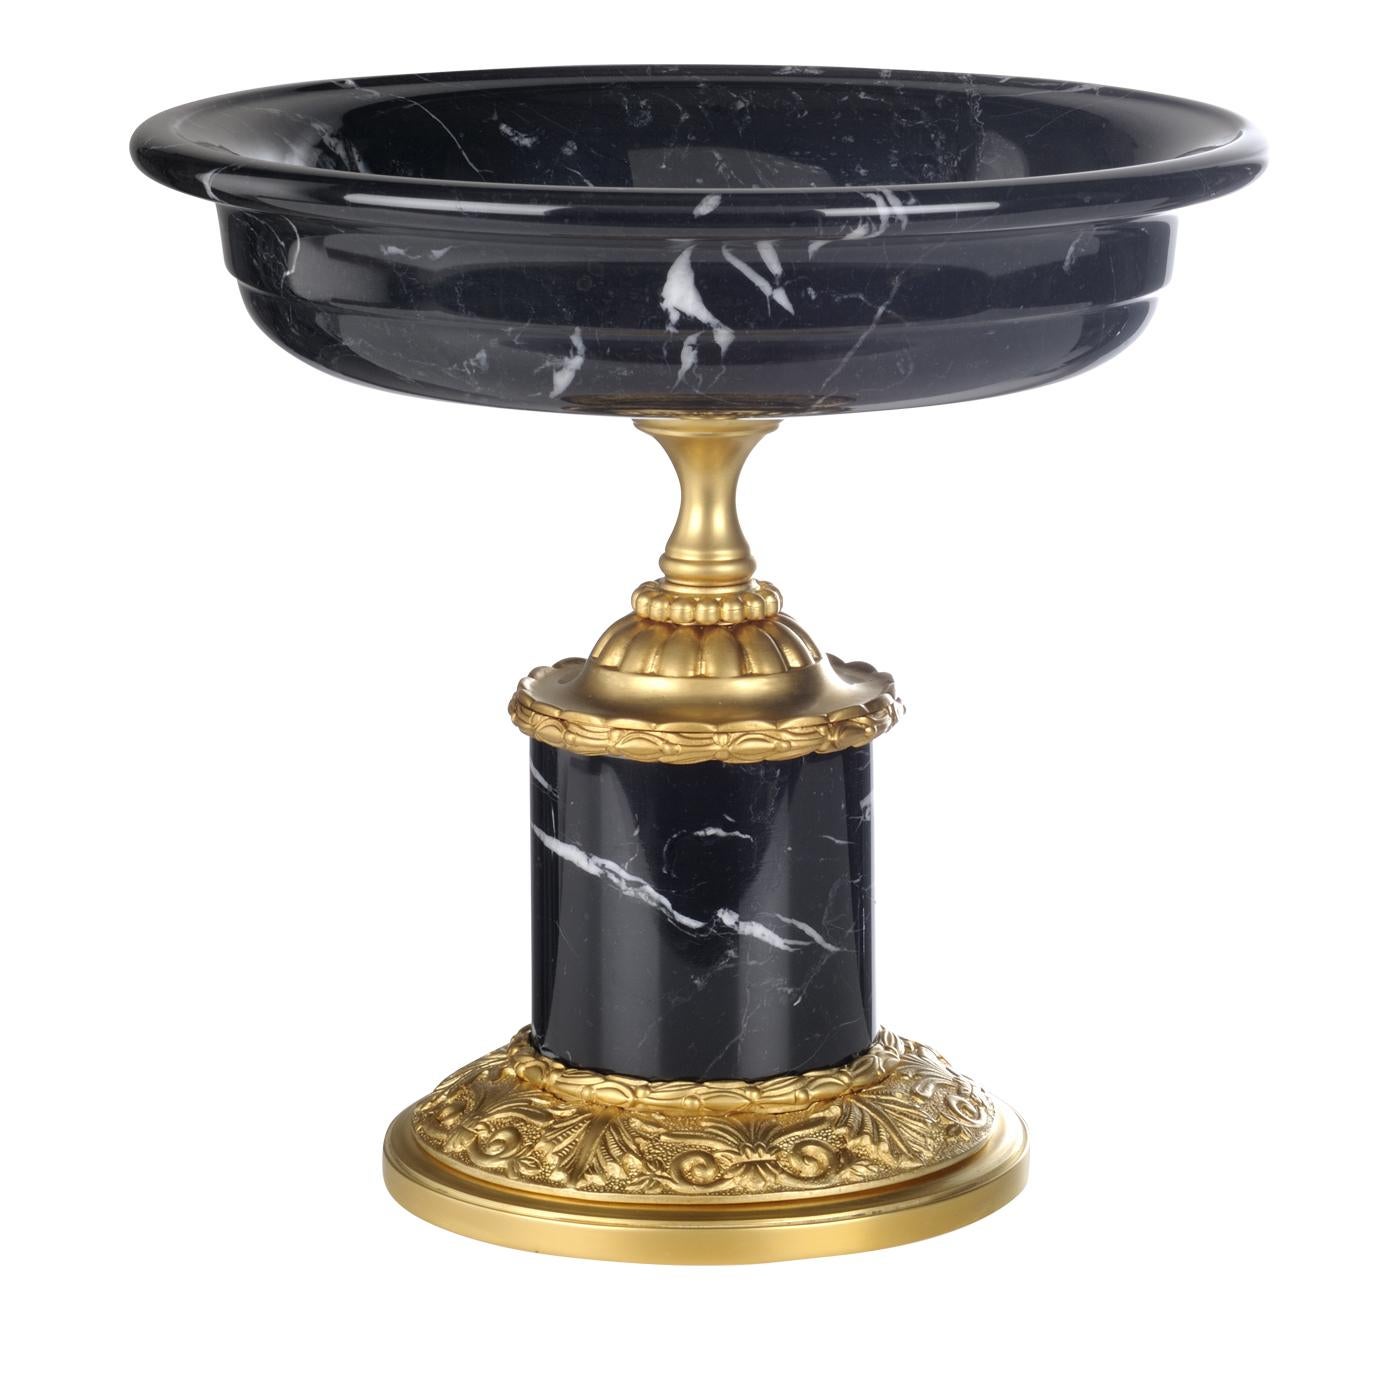 This magnificent centerpiece was made entirely by the hands of skilled artisans in Florence and the sophisticated elegance of its Classic design will enrich a dining table or an entryway. Its cylindrical pedestal in luxurious Marquina marble rests